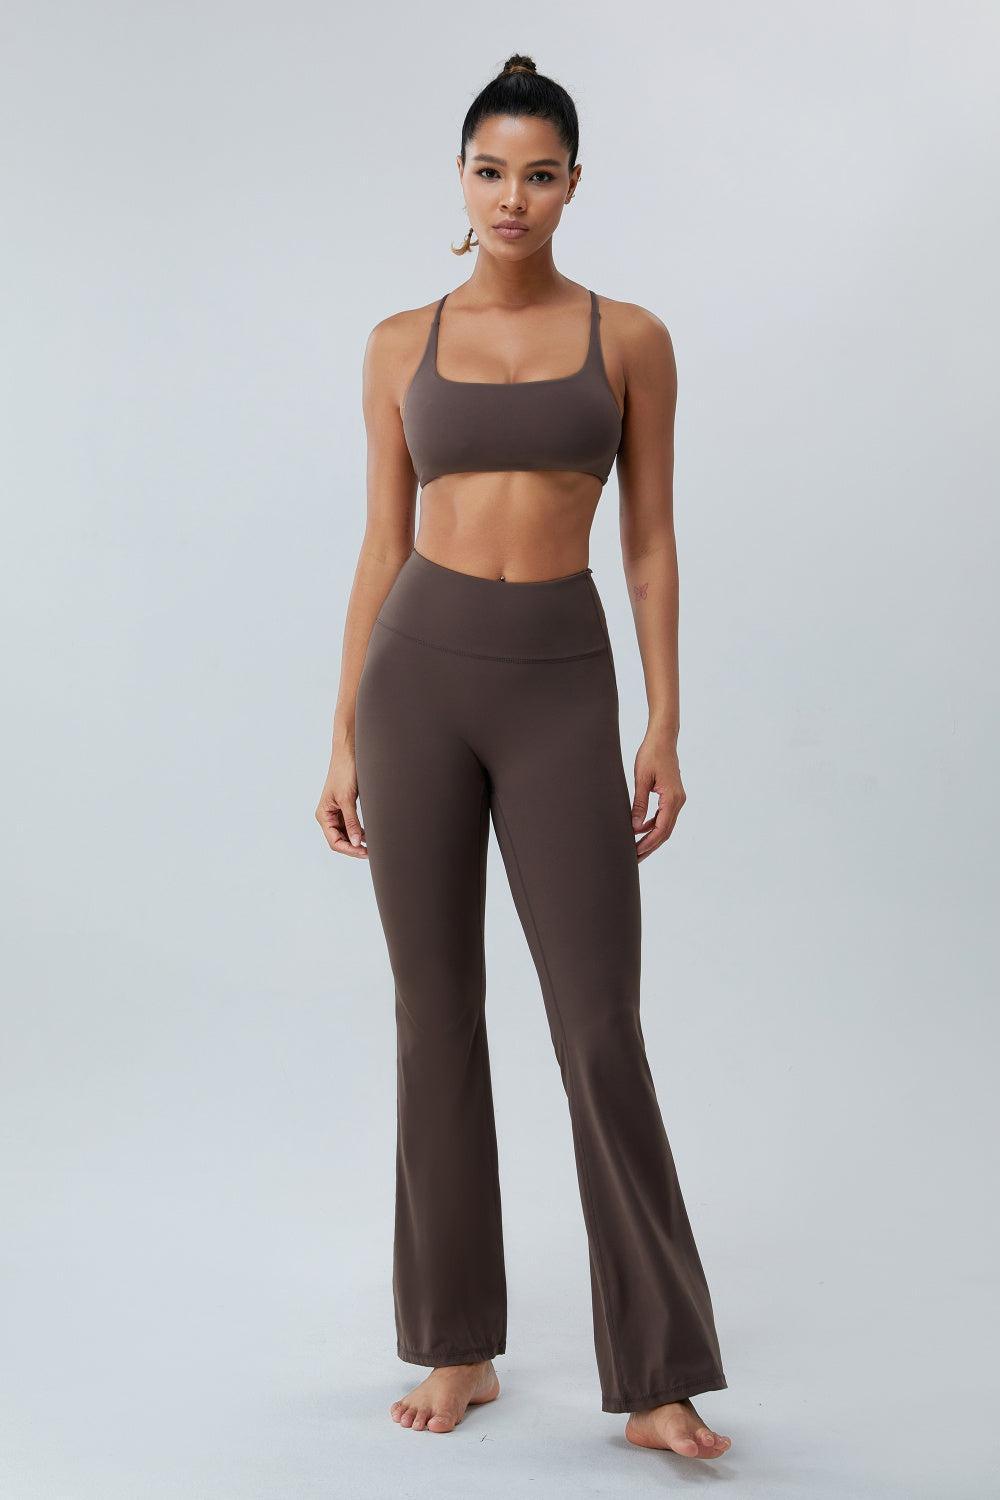 a woman in a brown sports bra top and wide legged pants